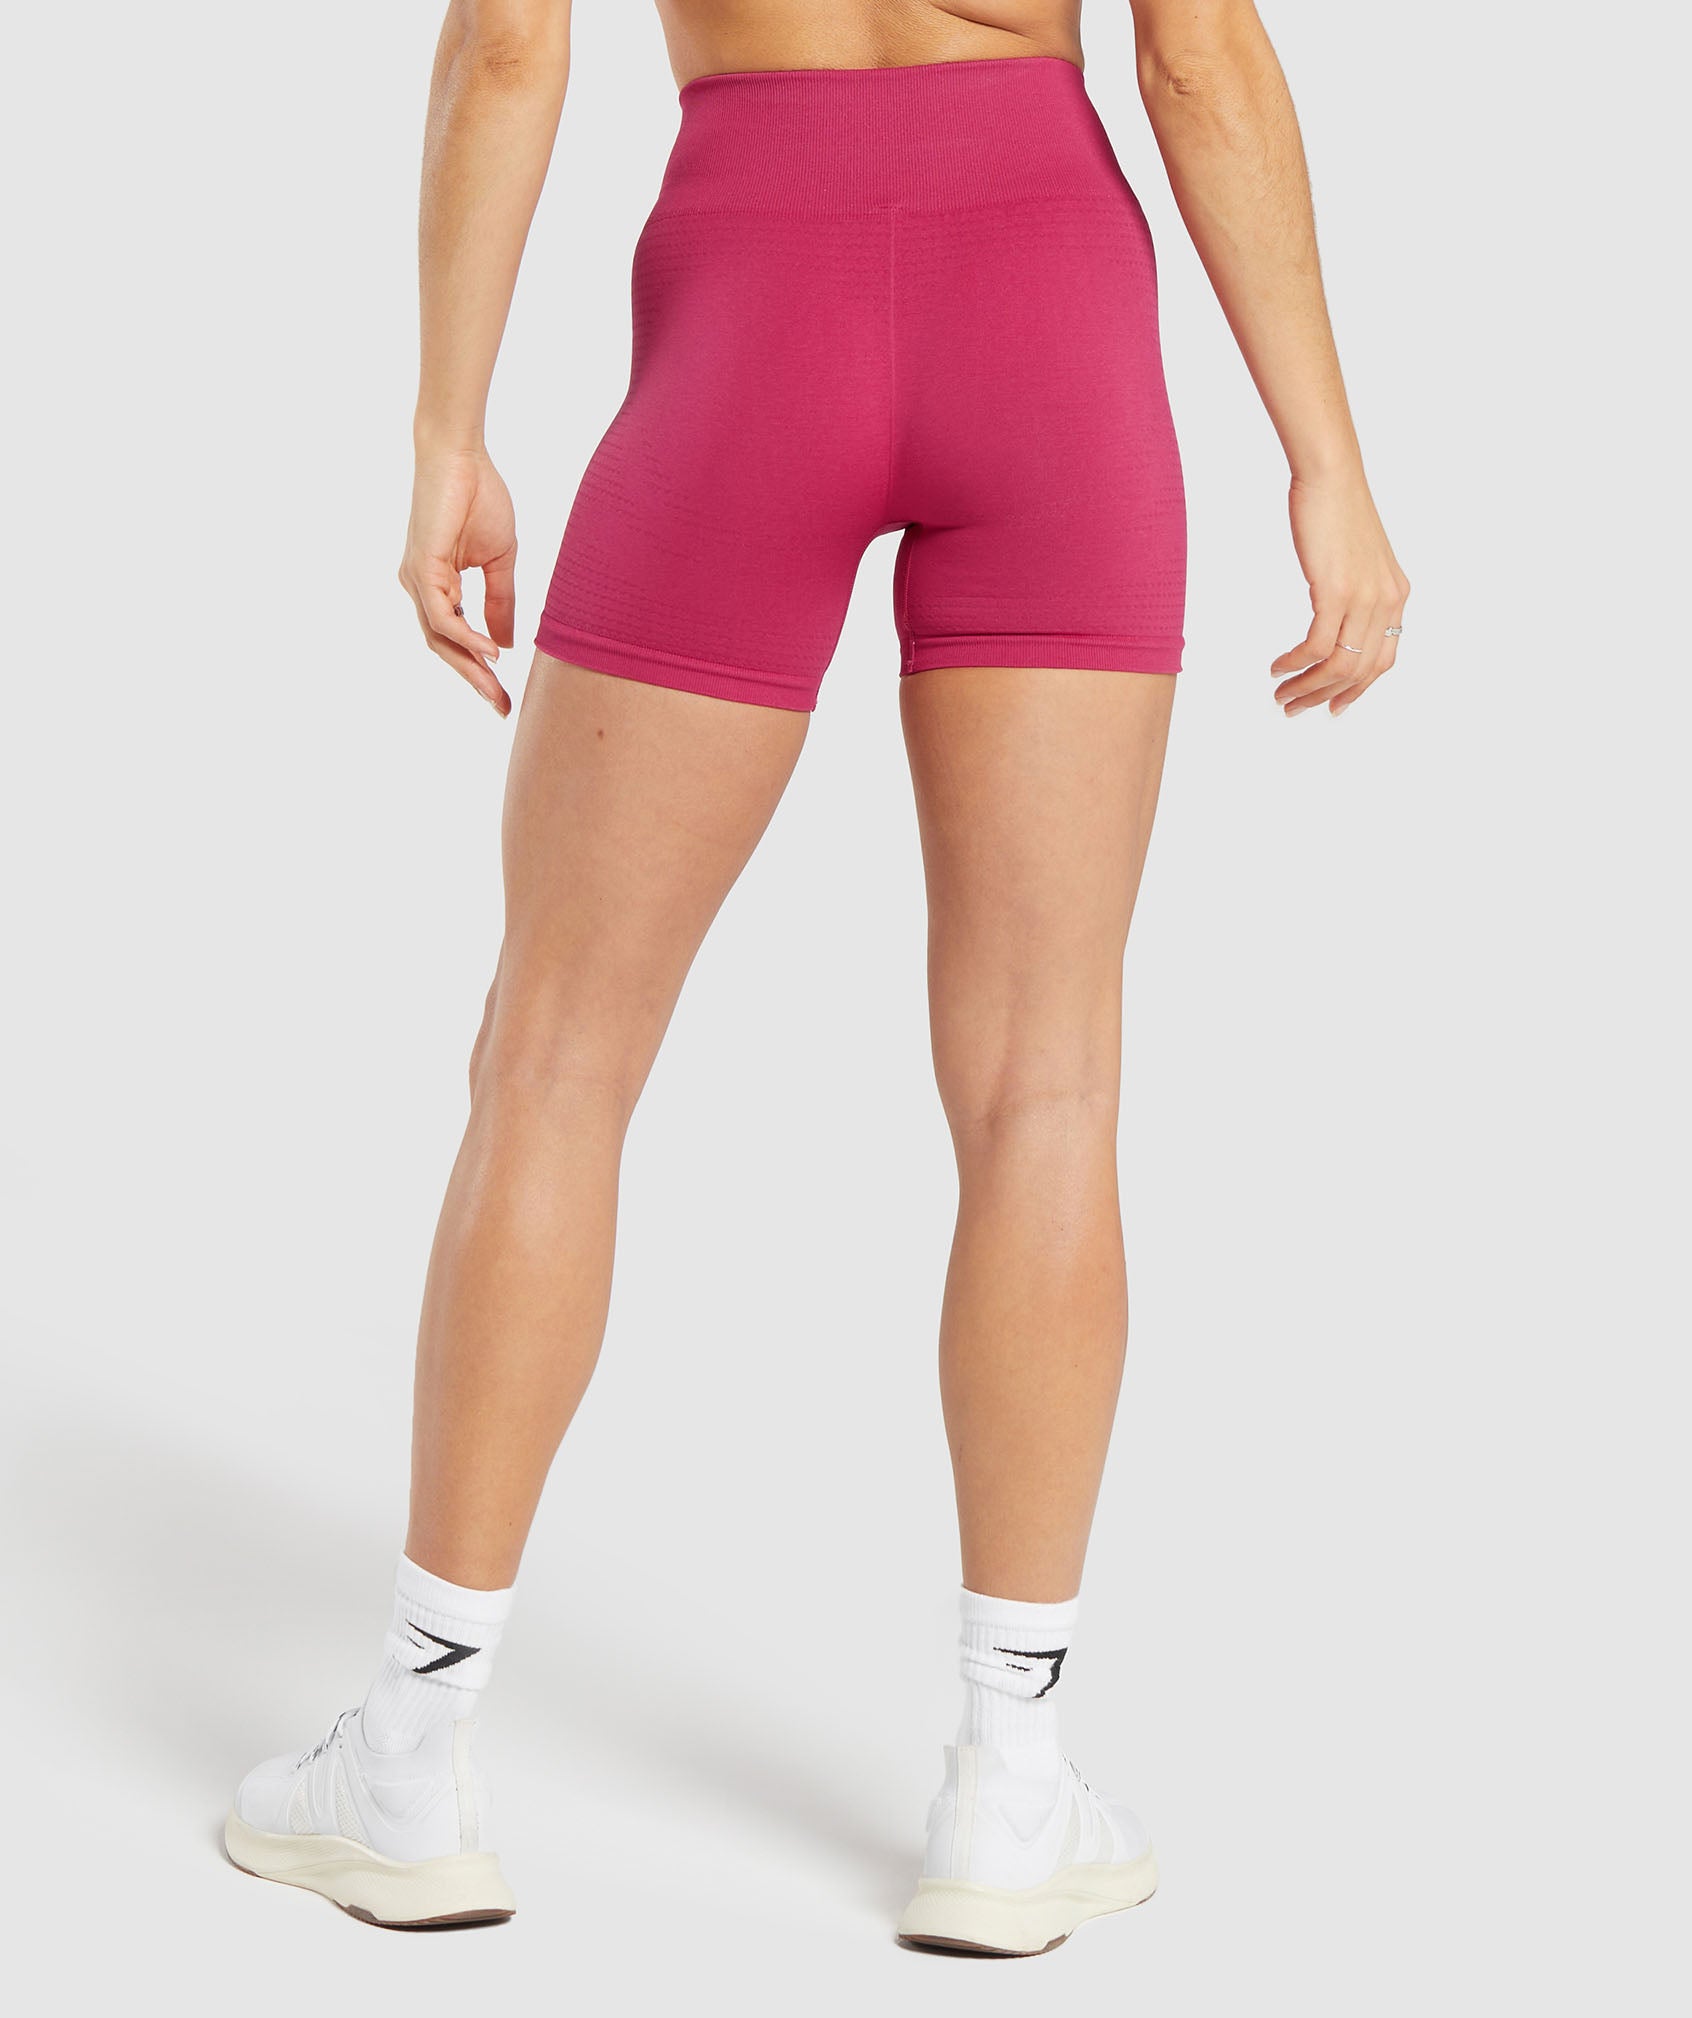 Vital Seamless 2.0 Shorts in Vintage Pink/Marl - view 3